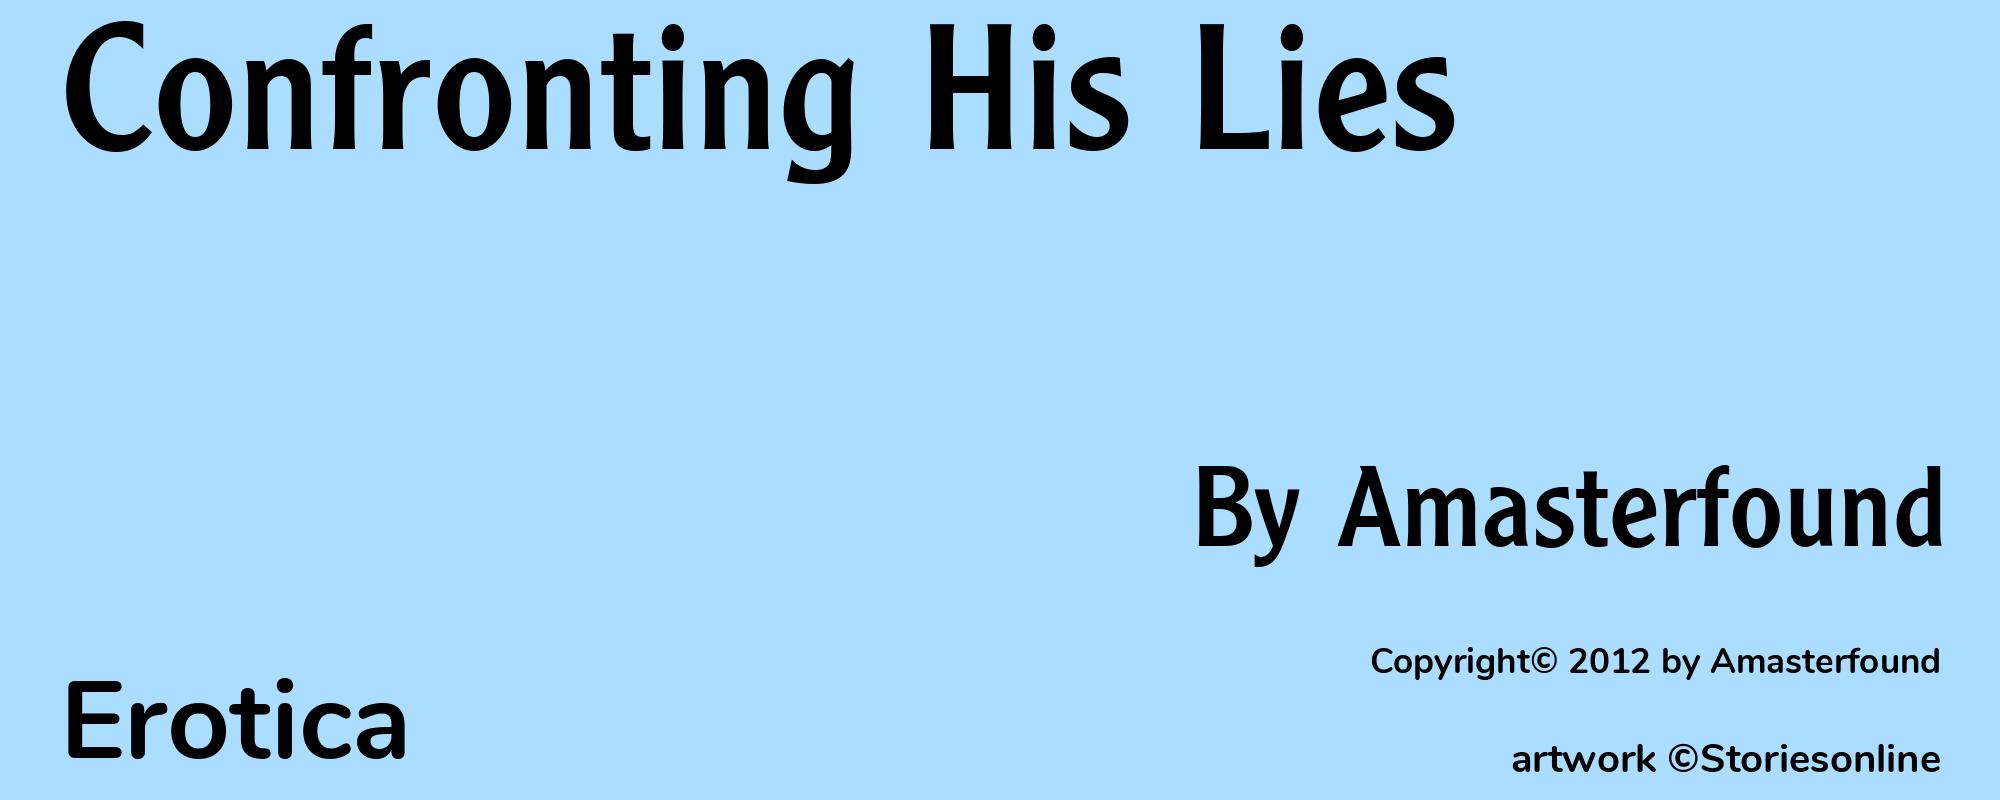 Confronting His Lies - Cover